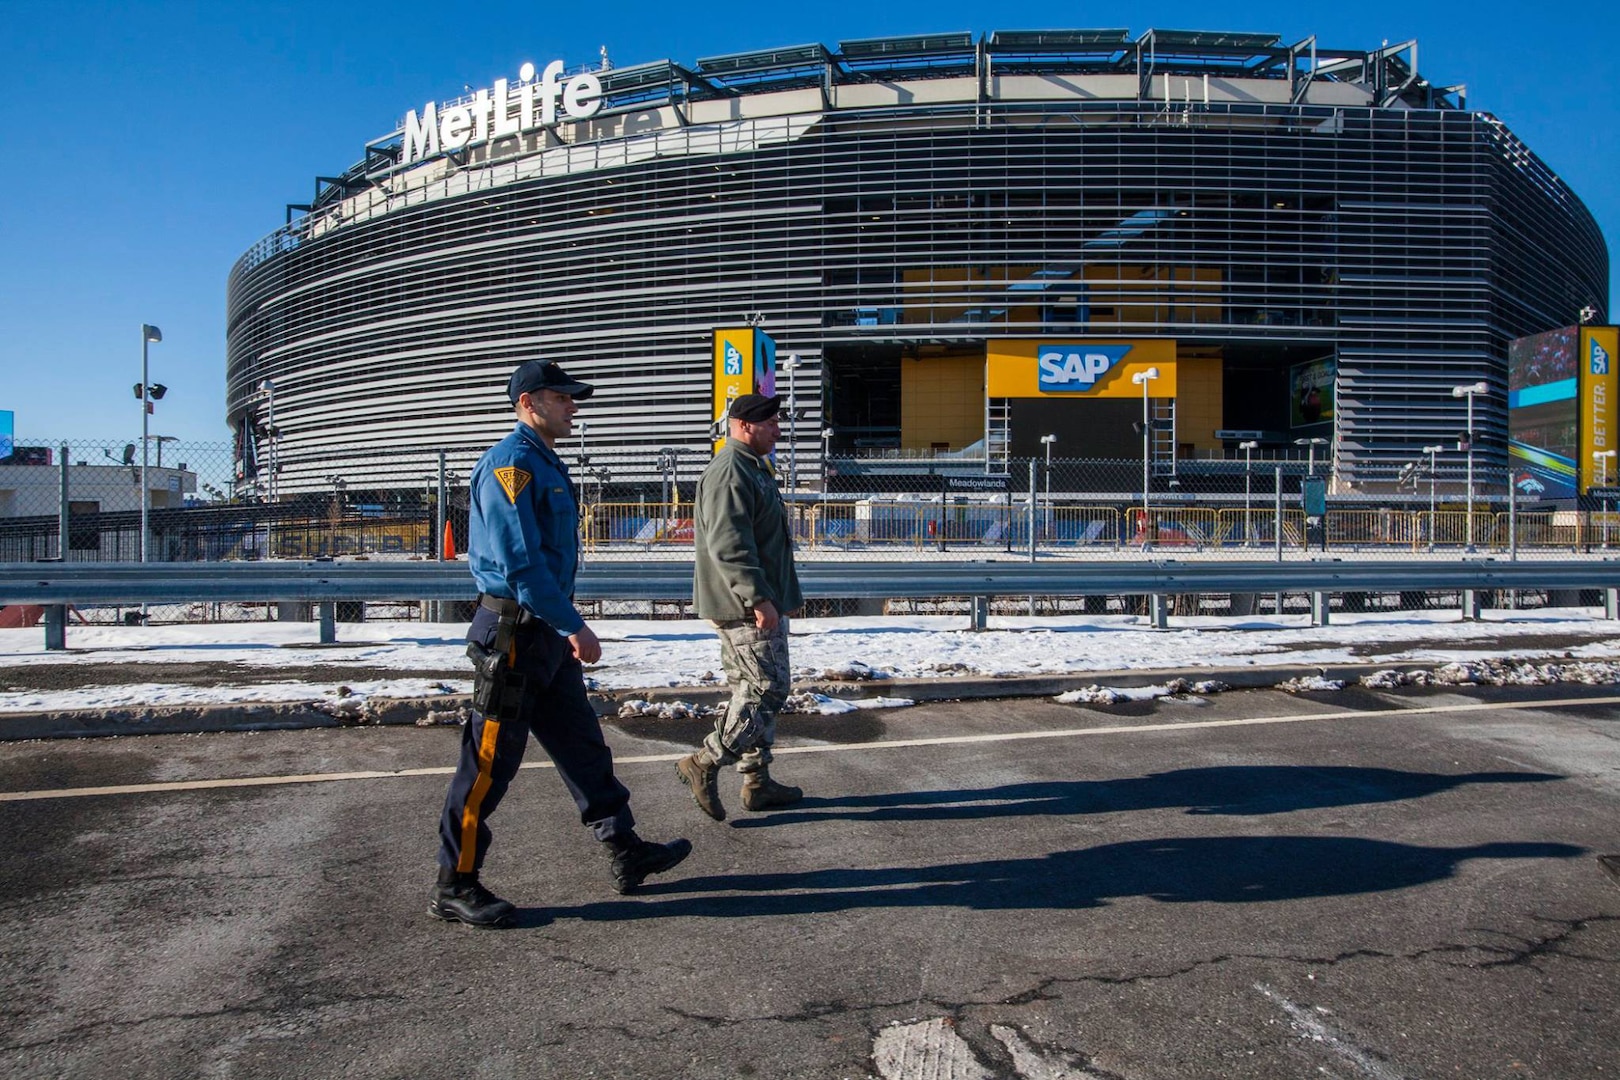 Staff Sgt. Jonathan Arochas, of the New Jersey National Guard's 108th Wing, monitors the perimeter of MetLife Stadium along with a New Jersey state trooper ahead of Super Bowl XLVIII. Guardsmen from six states are on duty supporting the event.